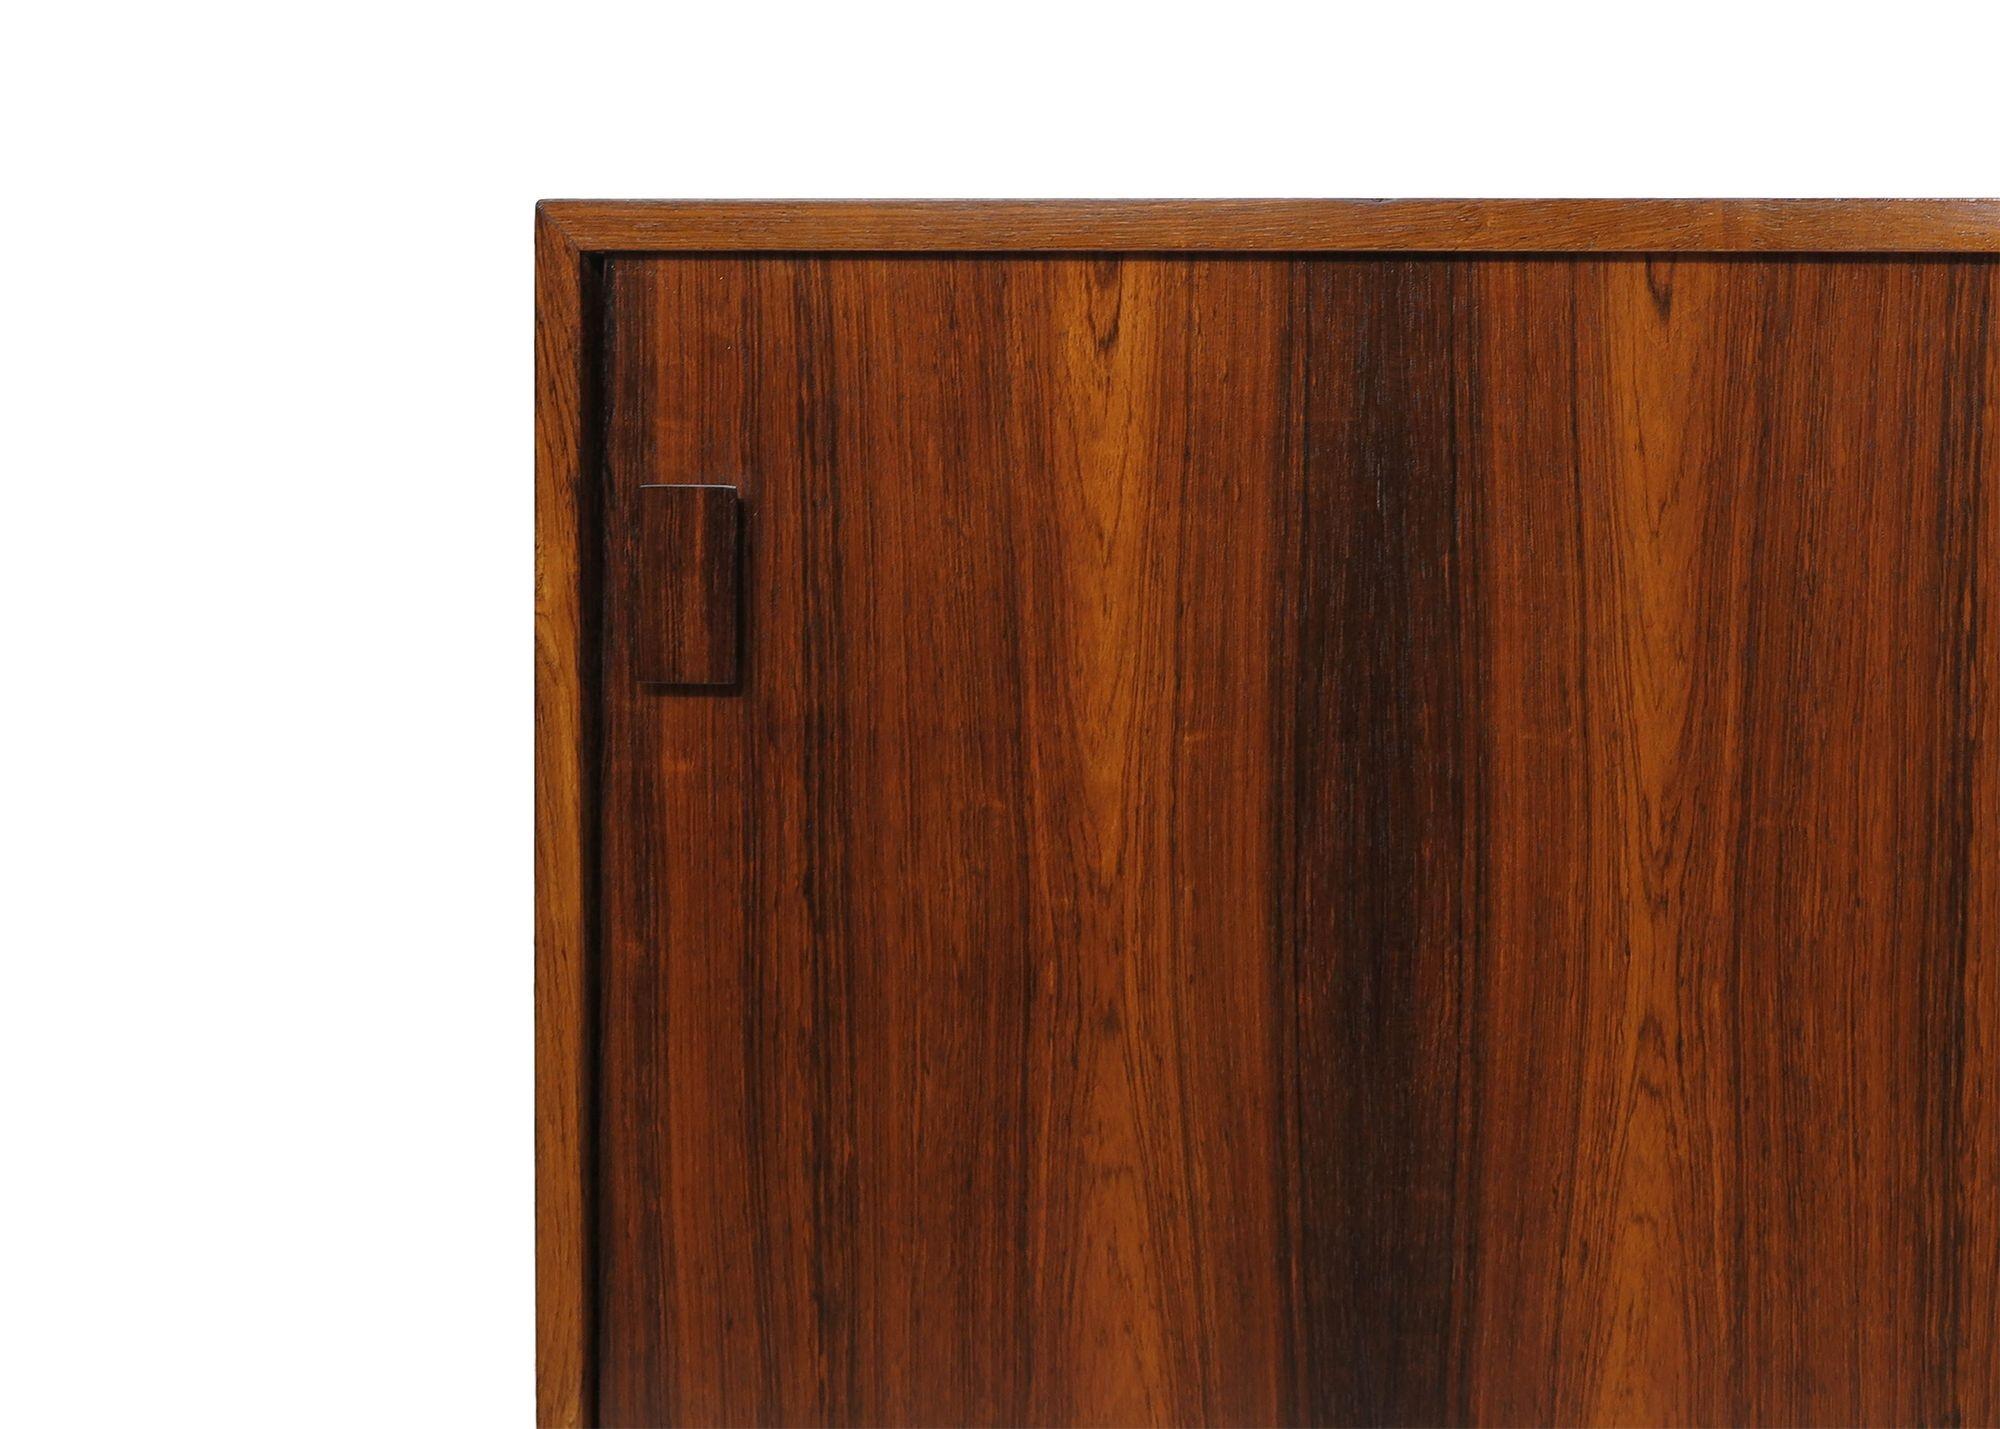 Mid-century Danish Brazilian Rosewood credenza designed by Jorgen Rasmussen for Dammann & Rasmussen Mobelfabrik, 1958, Denmark. The credenza is finely crafted of nicely figured Brazilian rosewood with mitered edges, book-matched grain, and squared